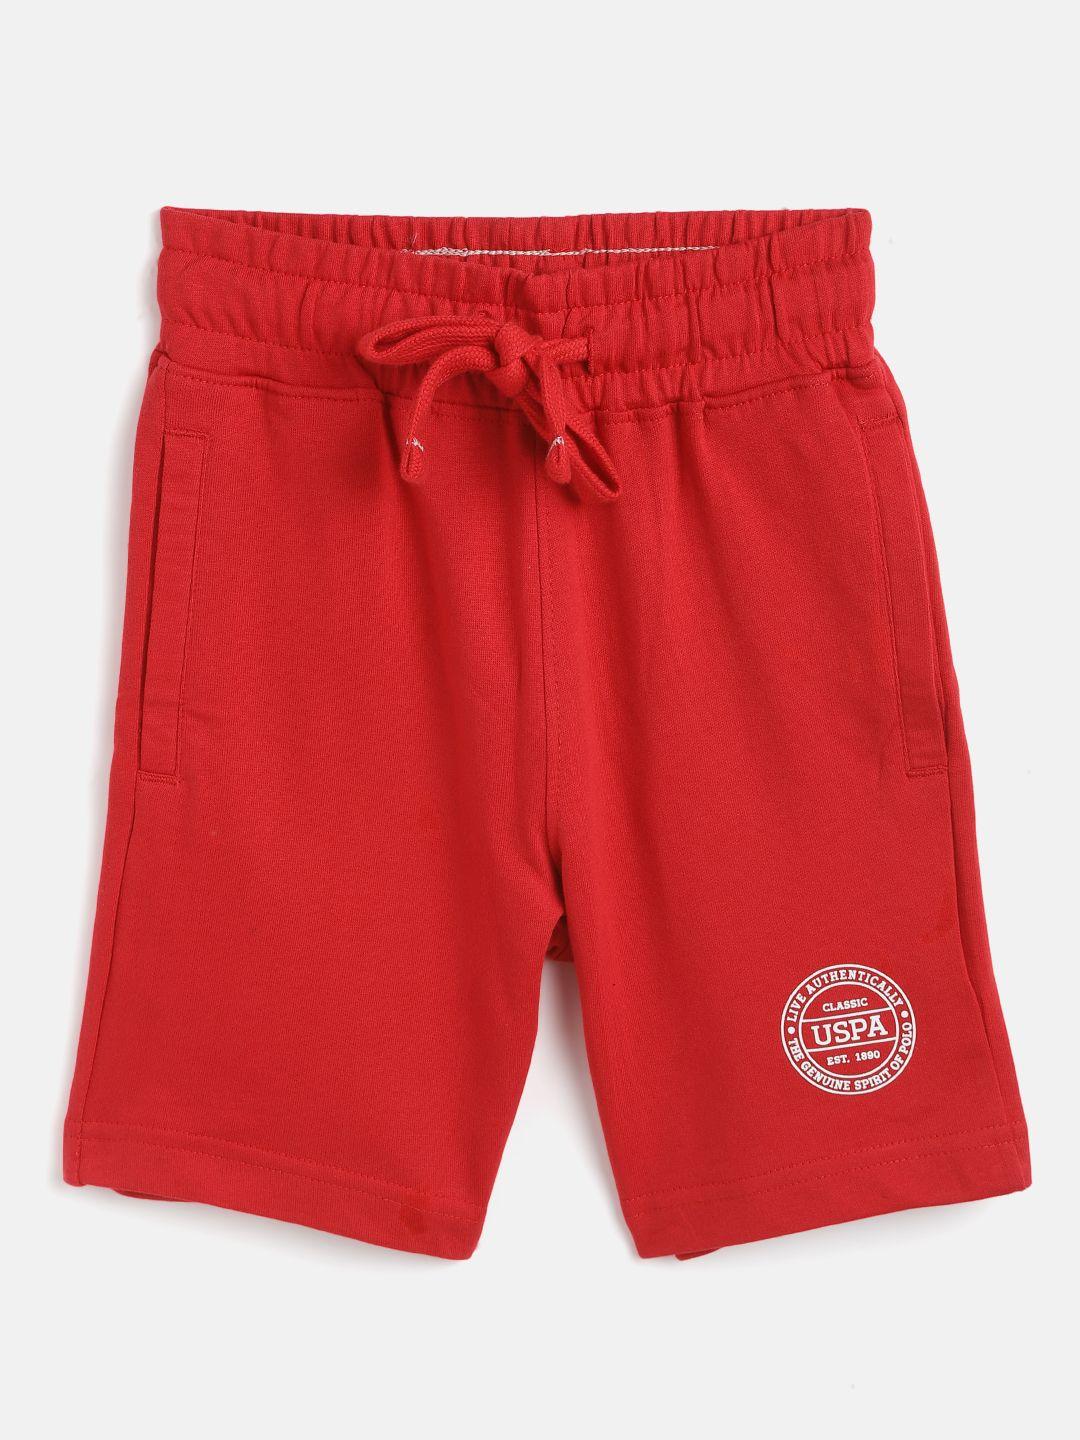 u.s.-polo-assn.-kids-boys-red-cotton-solid-lounge-shorts